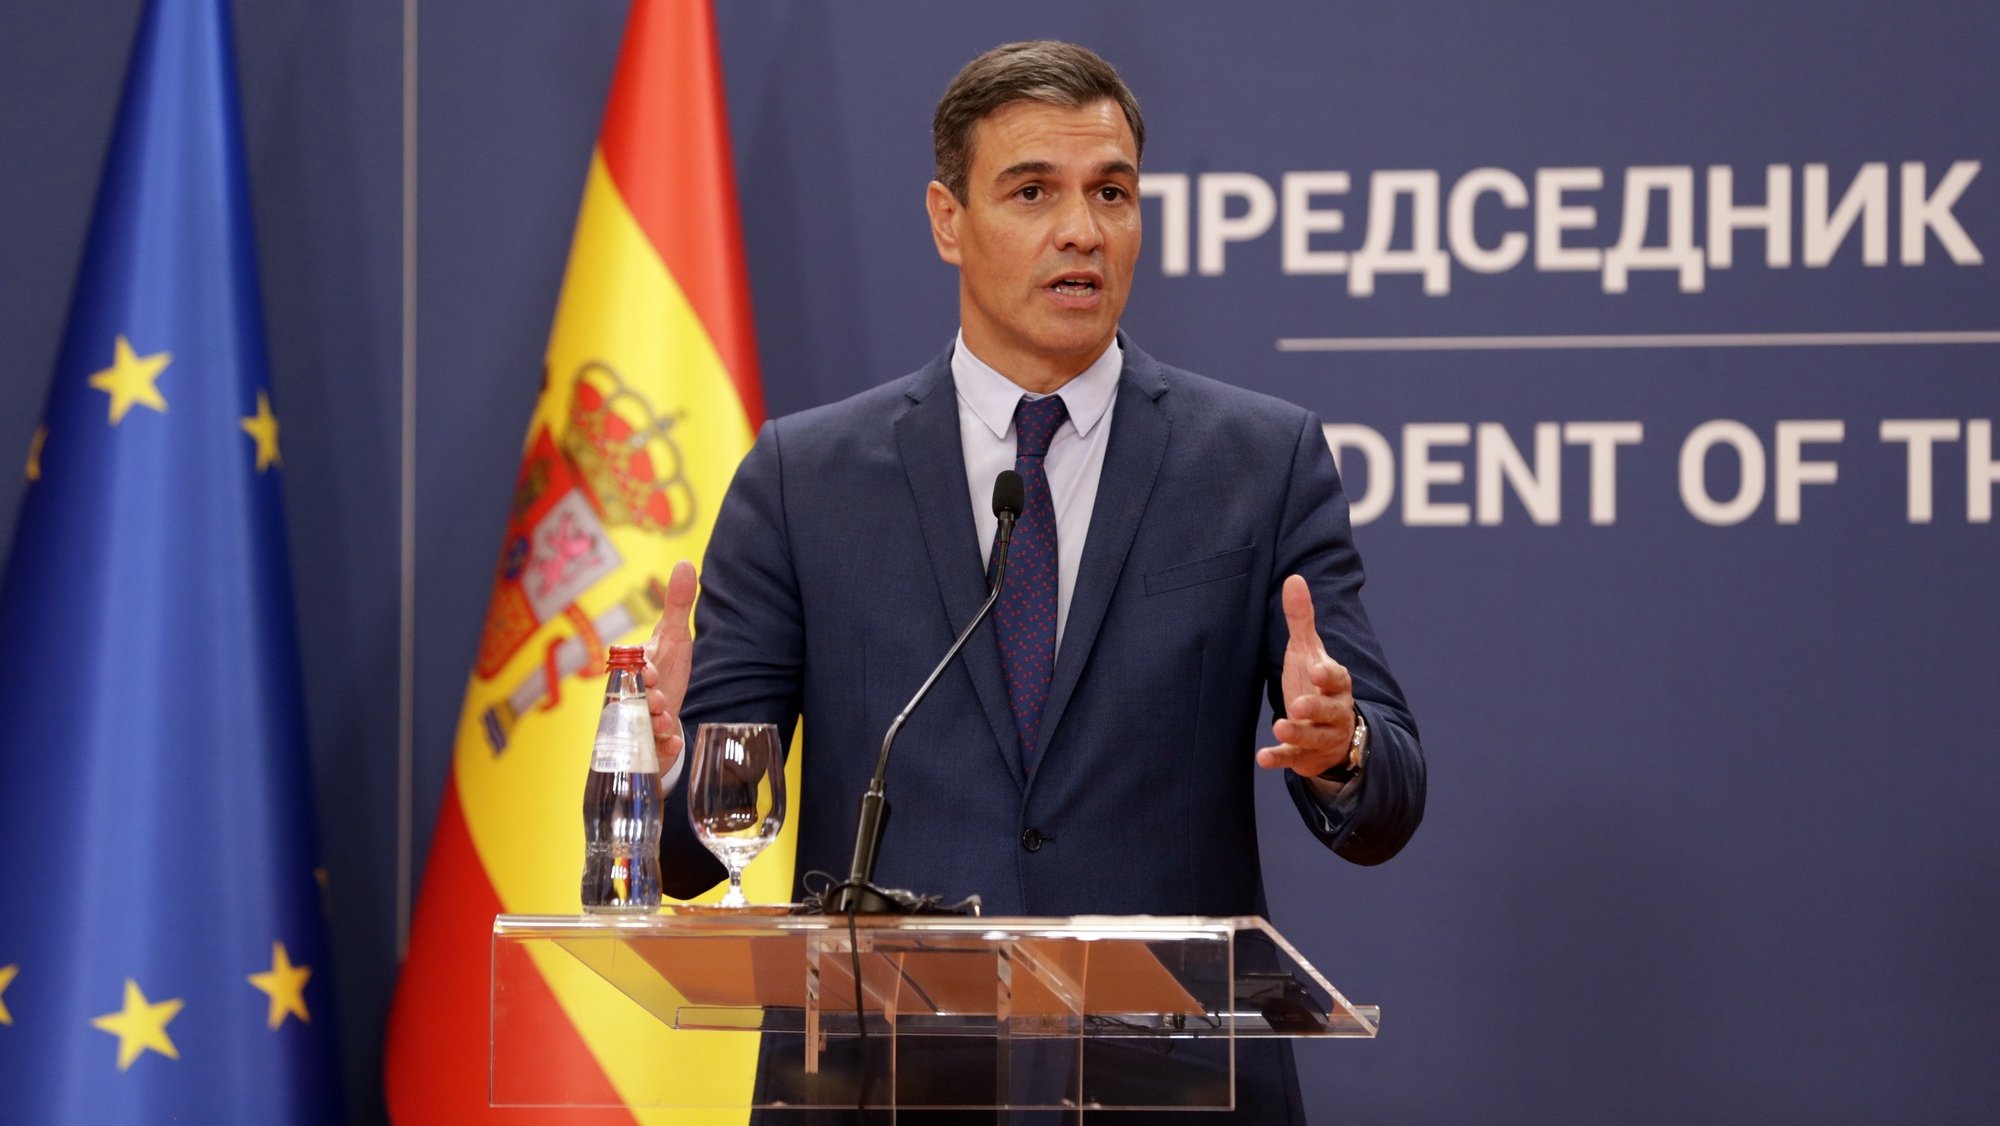 epa10097618 Spanish Prime Minister Pedro Sanchez speaks during a press conference with Serbian President after their meeting in Belgrade, Serbia, 29 July 2022. Prime Minister Sanchez is on an official state visit to Serbia.  EPA/ANDREJ CUKIC